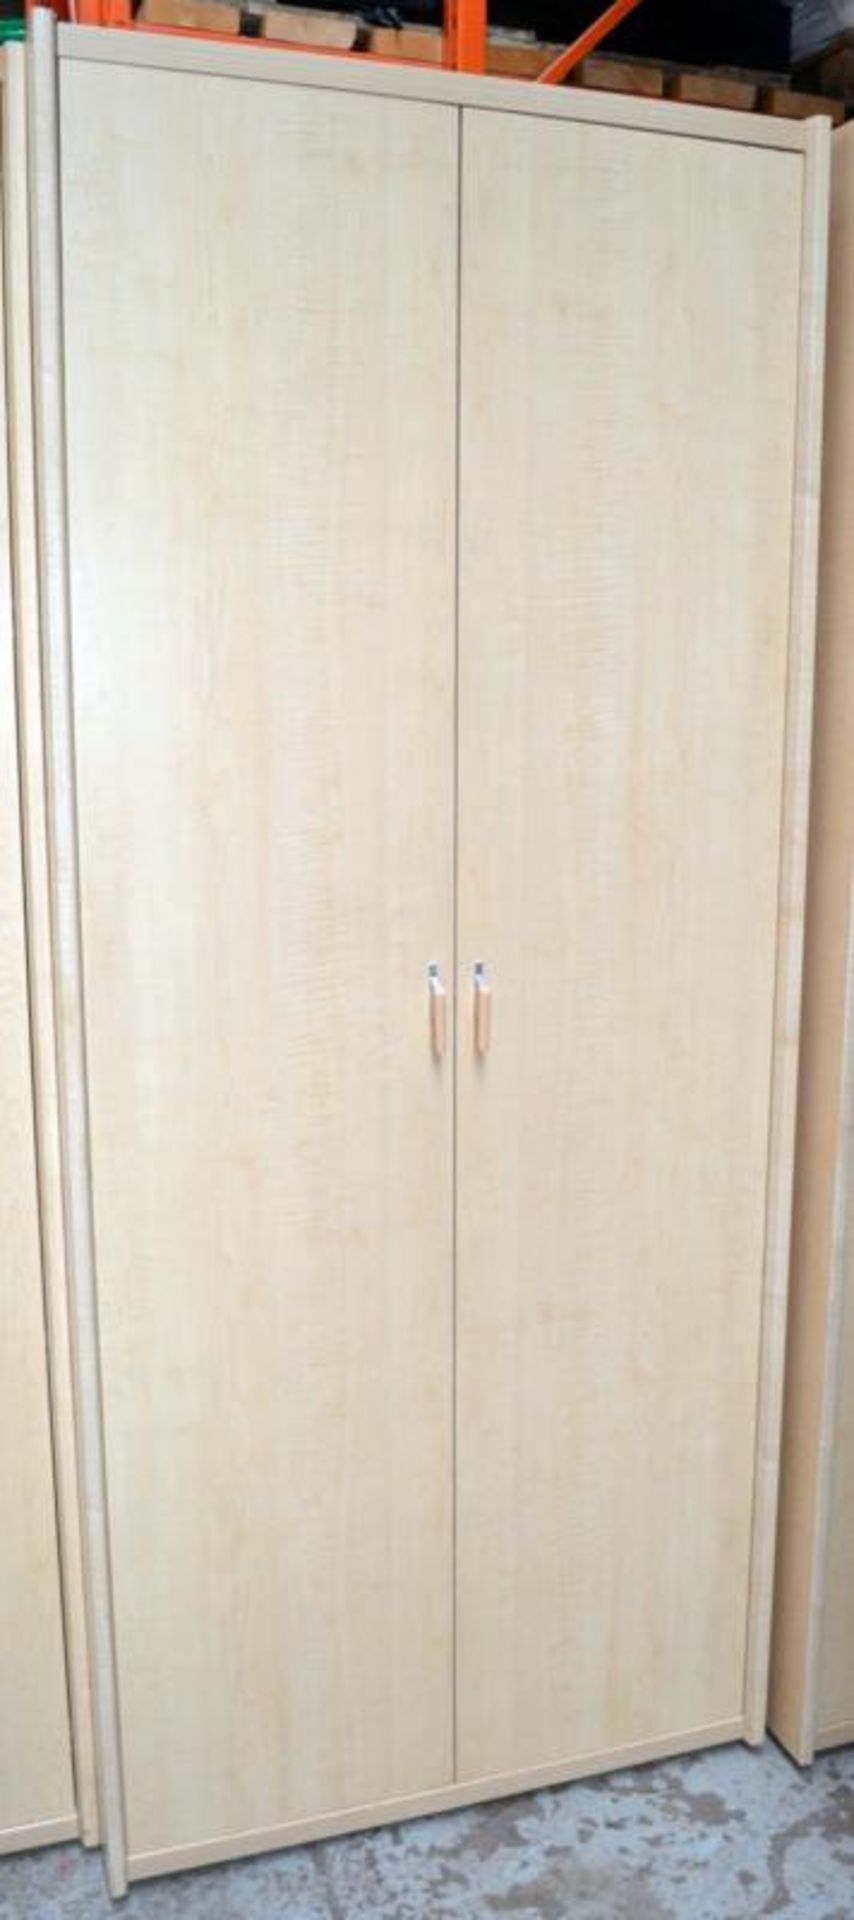 1 x GAUTIER Tall Wardrobe With A Natural Oak Style Finish - Made In France - Dimensions: H222 x W93. - Image 9 of 9